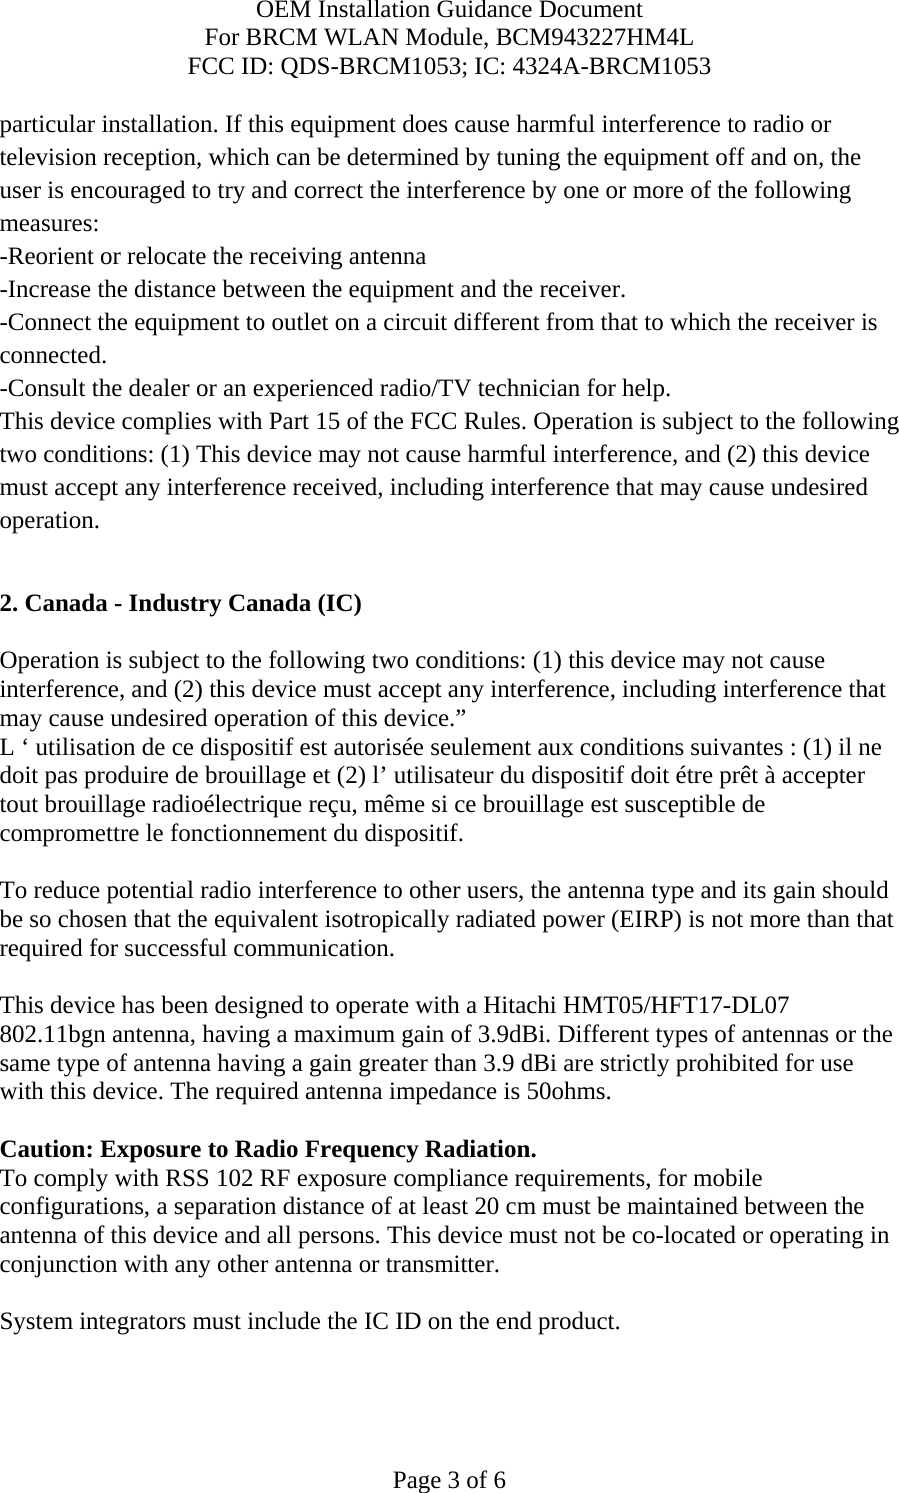 OEM Installation Guidance Document For BRCM WLAN Module, BCM943227HM4L FCC ID: QDS-BRCM1053; IC: 4324A-BRCM1053  Page 3 of 6 particular installation. If this equipment does cause harmful interference to radio or television reception, which can be determined by tuning the equipment off and on, the user is encouraged to try and correct the interference by one or more of the following measures: -Reorient or relocate the receiving antenna -Increase the distance between the equipment and the receiver. -Connect the equipment to outlet on a circuit different from that to which the receiver is connected. -Consult the dealer or an experienced radio/TV technician for help. This device complies with Part 15 of the FCC Rules. Operation is subject to the following two conditions: (1) This device may not cause harmful interference, and (2) this device must accept any interference received, including interference that may cause undesired operation.  2. Canada - Industry Canada (IC)  Operation is subject to the following two conditions: (1) this device may not cause interference, and (2) this device must accept any interference, including interference that may cause undesired operation of this device.” L ‘ utilisation de ce dispositif est autorisée seulement aux conditions suivantes : (1) il ne doit pas produire de brouillage et (2) l’ utilisateur du dispositif doit étre prêt à accepter tout brouillage radioélectrique reçu, même si ce brouillage est susceptible de compromettre le fonctionnement du dispositif.  To reduce potential radio interference to other users, the antenna type and its gain should be so chosen that the equivalent isotropically radiated power (EIRP) is not more than that required for successful communication.  This device has been designed to operate with a Hitachi HMT05/HFT17-DL07 802.11bgn antenna, having a maximum gain of 3.9dBi. Different types of antennas or the same type of antenna having a gain greater than 3.9 dBi are strictly prohibited for use with this device. The required antenna impedance is 50ohms.  Caution: Exposure to Radio Frequency Radiation. To comply with RSS 102 RF exposure compliance requirements, for mobile configurations, a separation distance of at least 20 cm must be maintained between the antenna of this device and all persons. This device must not be co-located or operating in conjunction with any other antenna or transmitter.  System integrators must include the IC ID on the end product.   